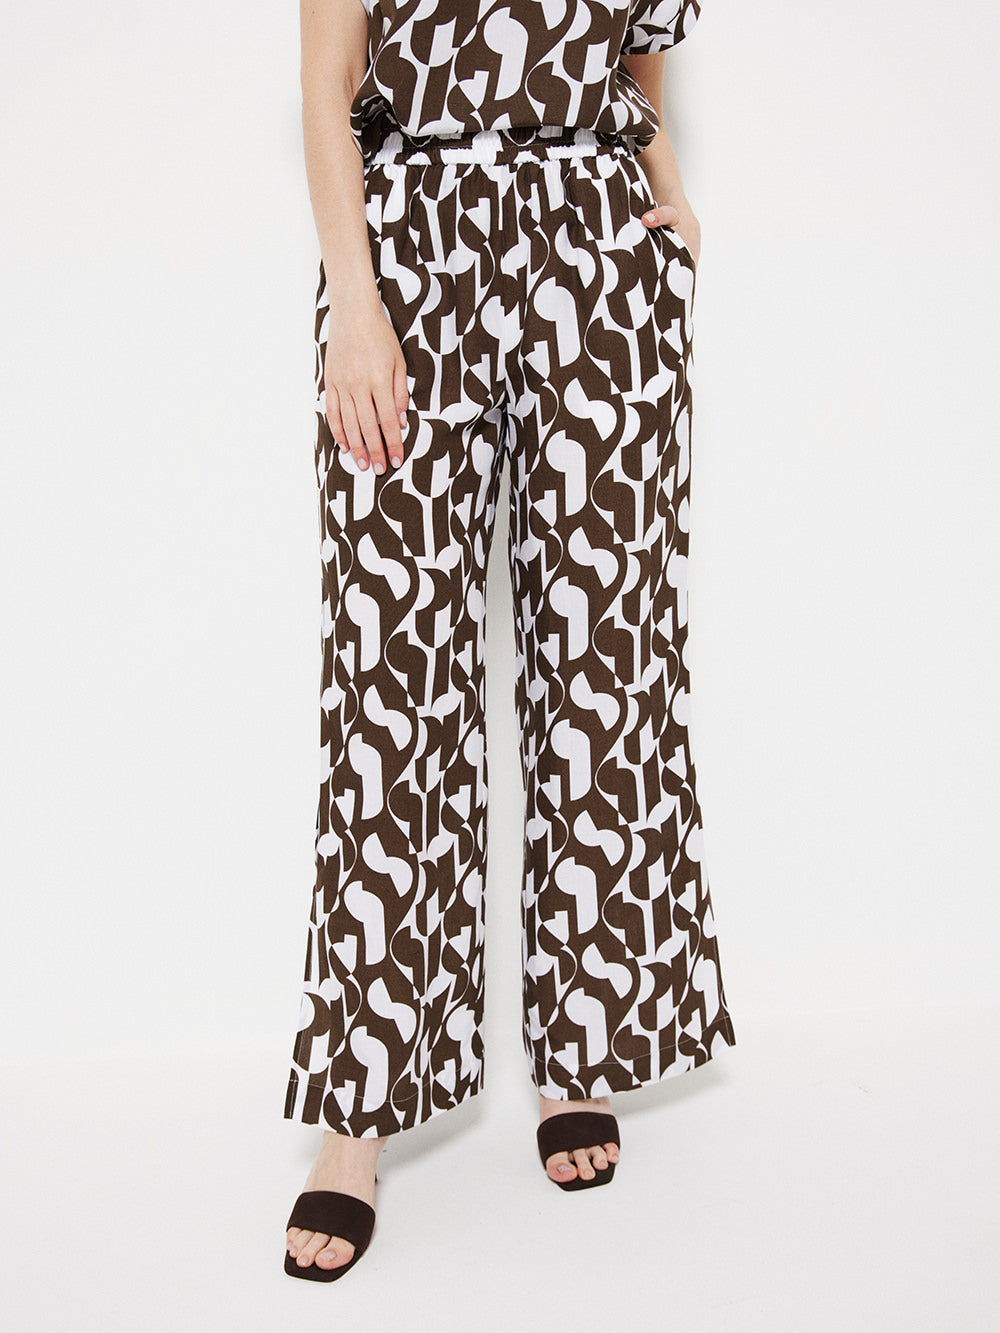 The Graphic Print Pant